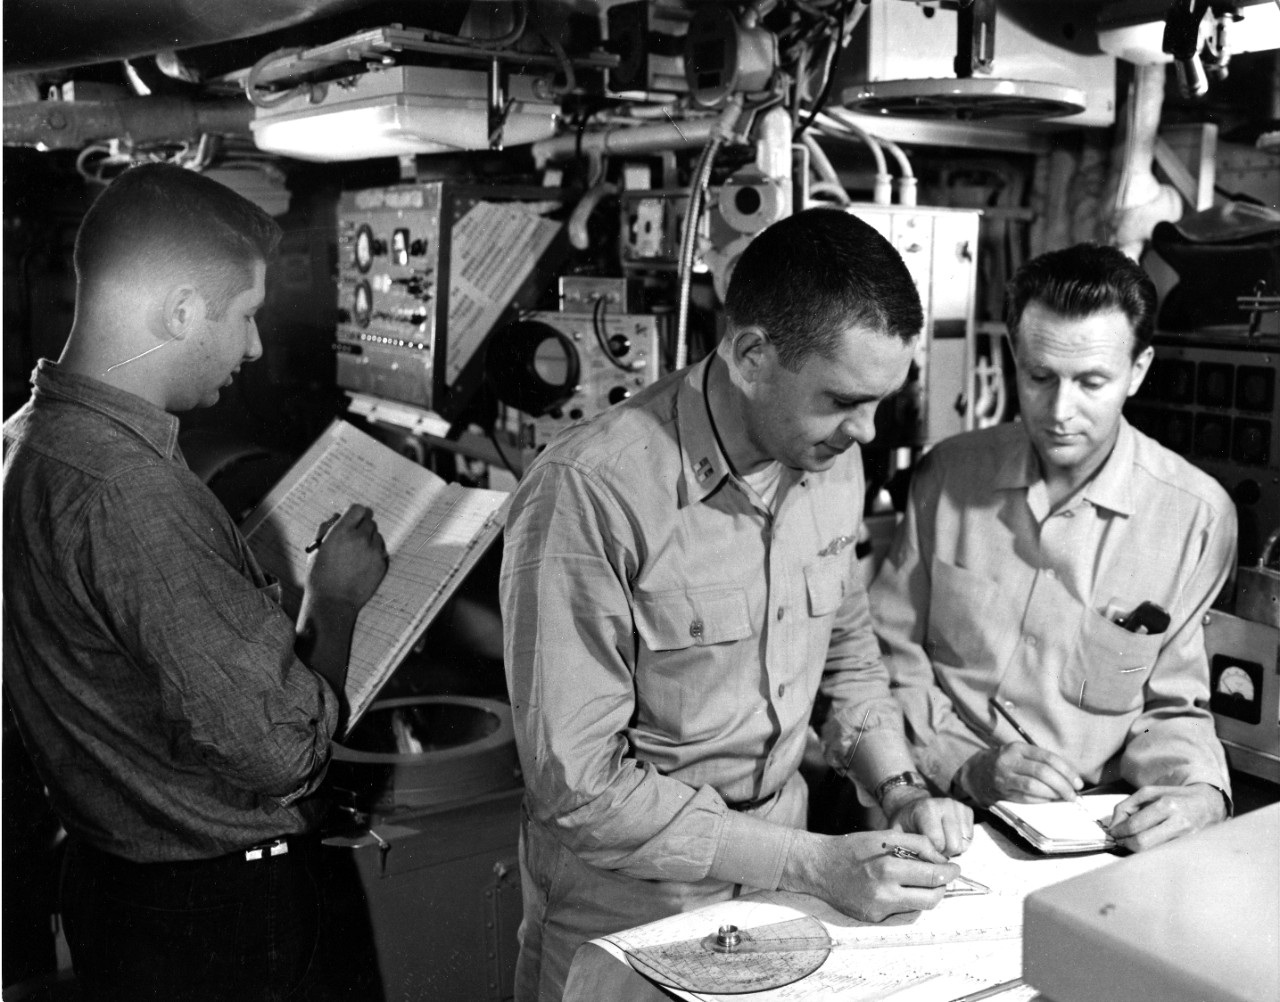 Checking position of USS Nautilus (SSN-571) from internal navigation system during final approach to the North Pole. August 12, 1958. Image is from the USS Nautilus Collection, UA 475.05